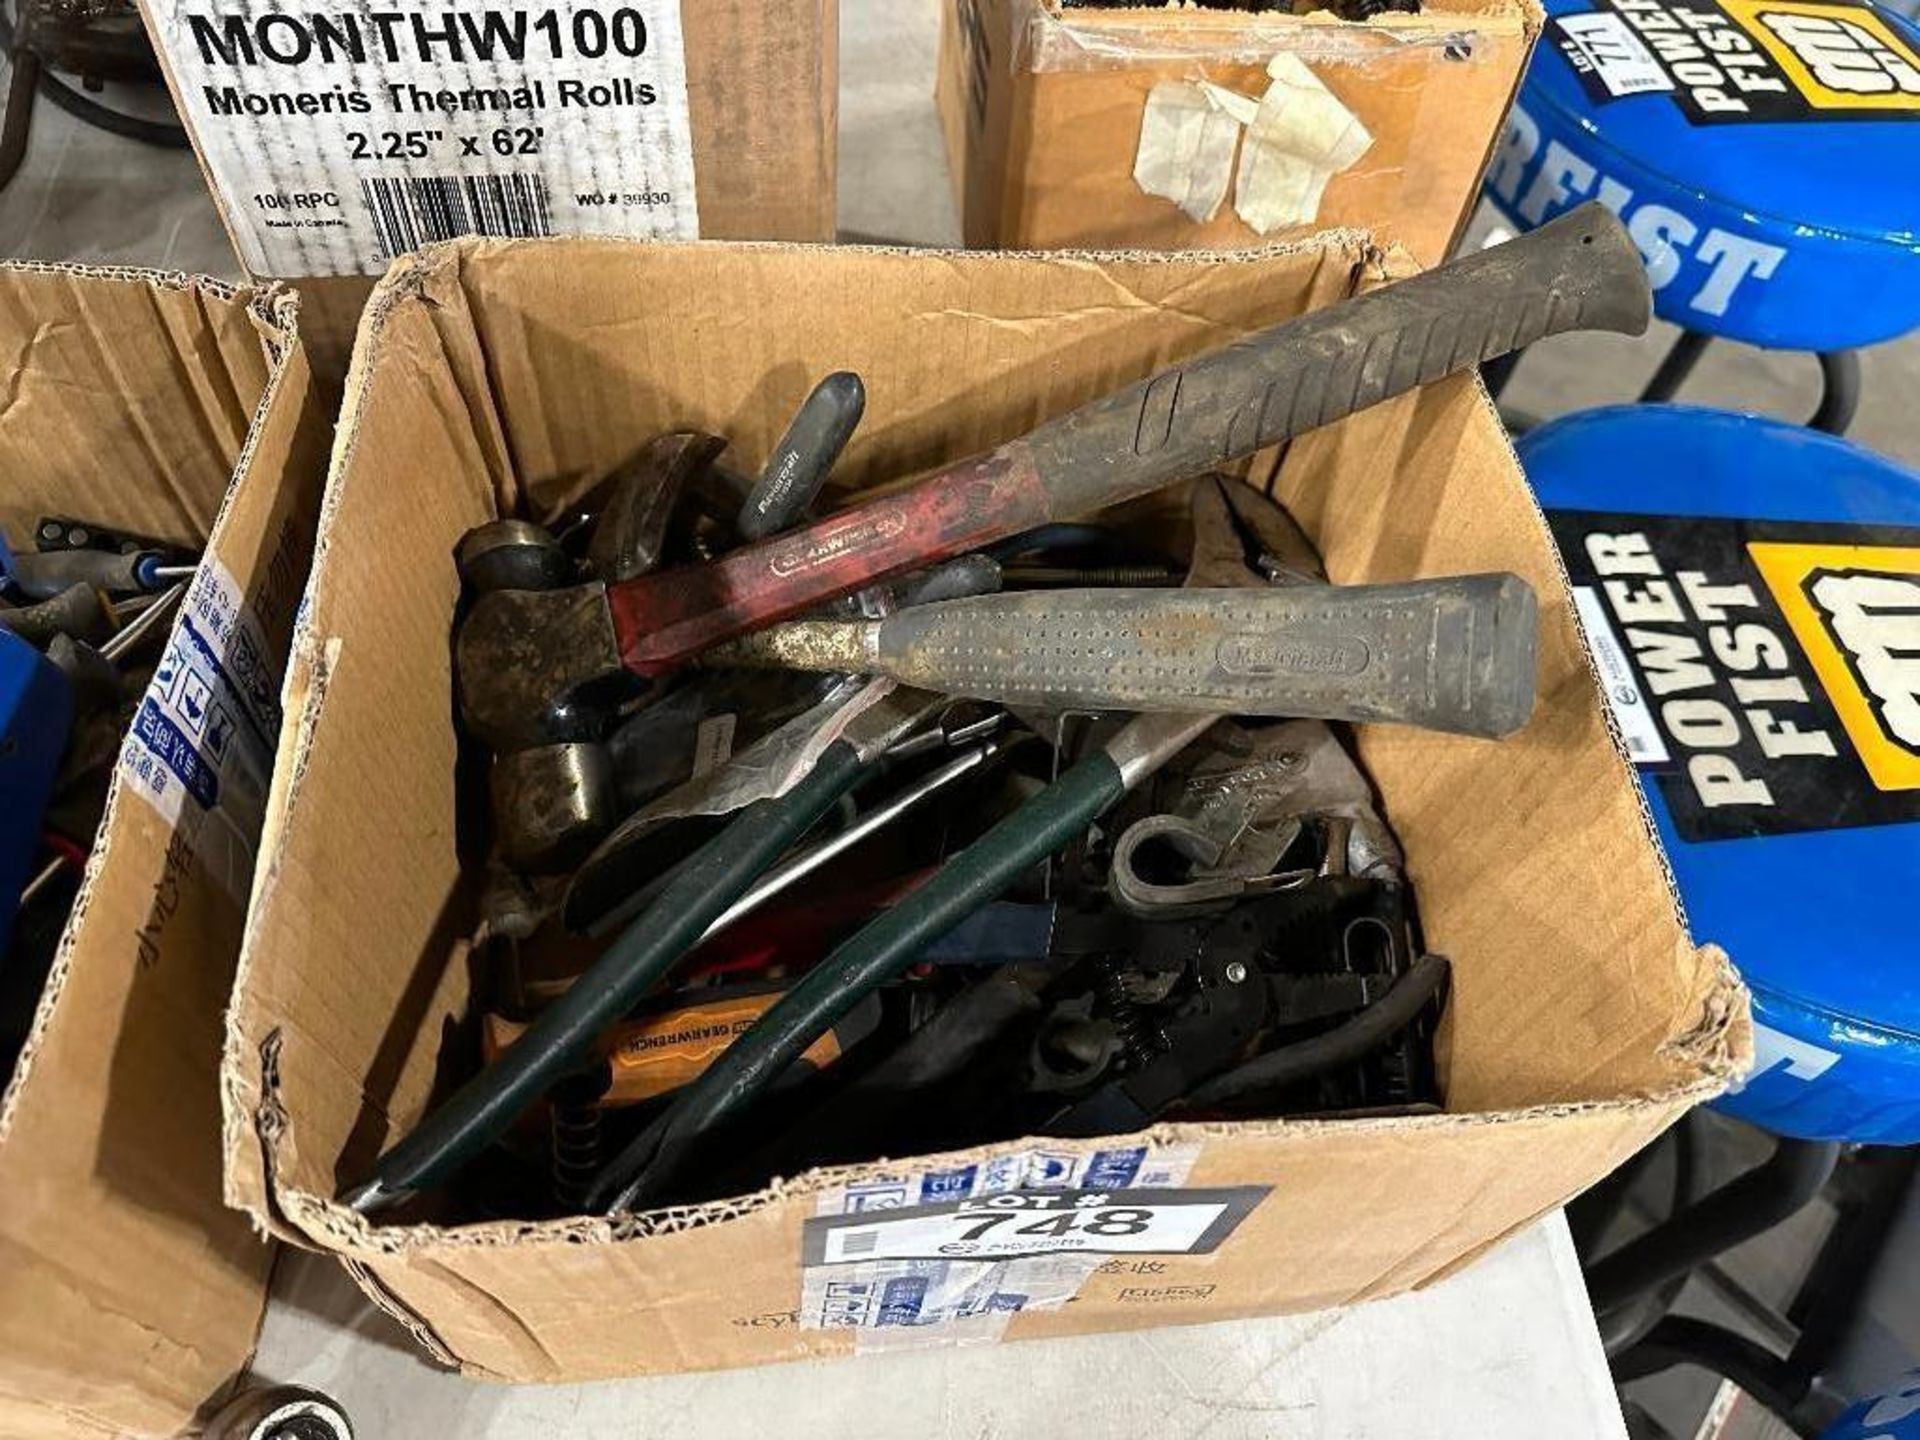 Lot of Asst. Hammers, Pliers, Wire Strippers, etc.